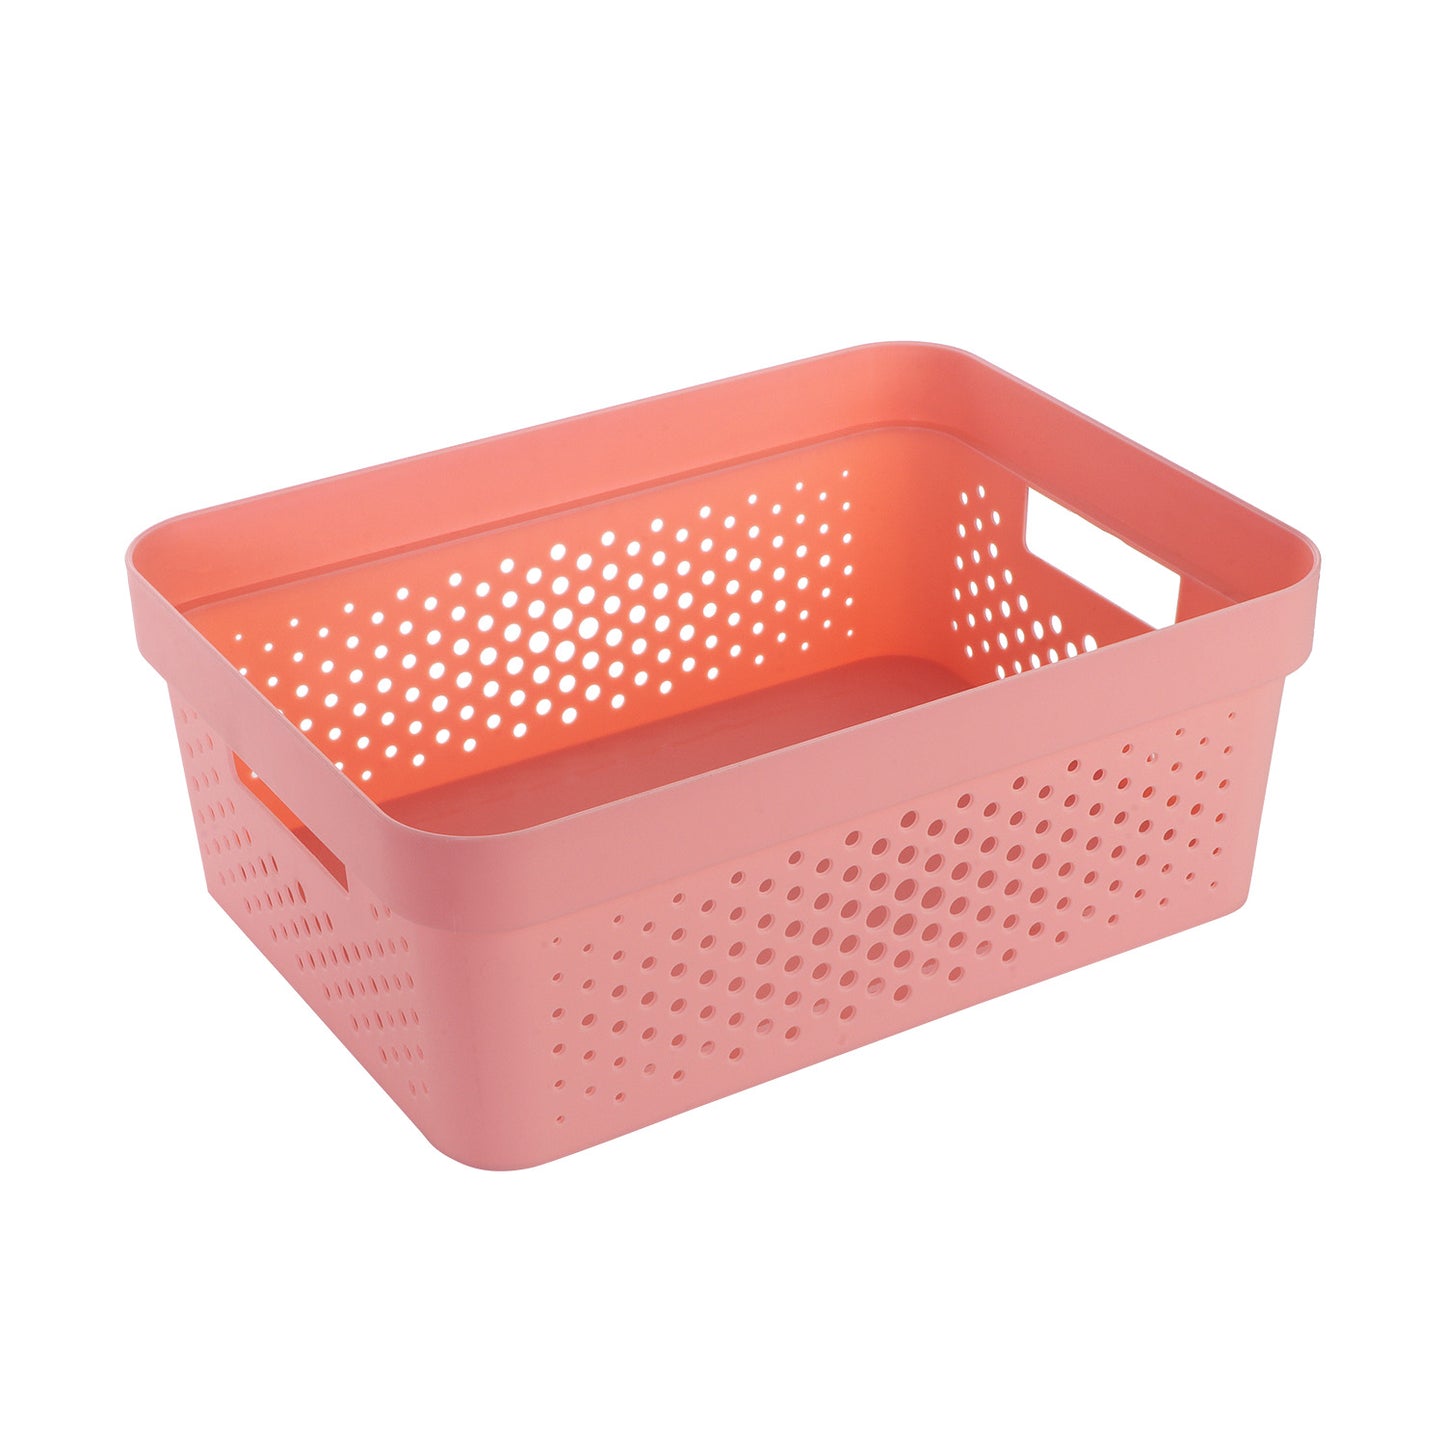 Large Multipurpose Basket with Lid| Premium Organisers by Sam Home Collection